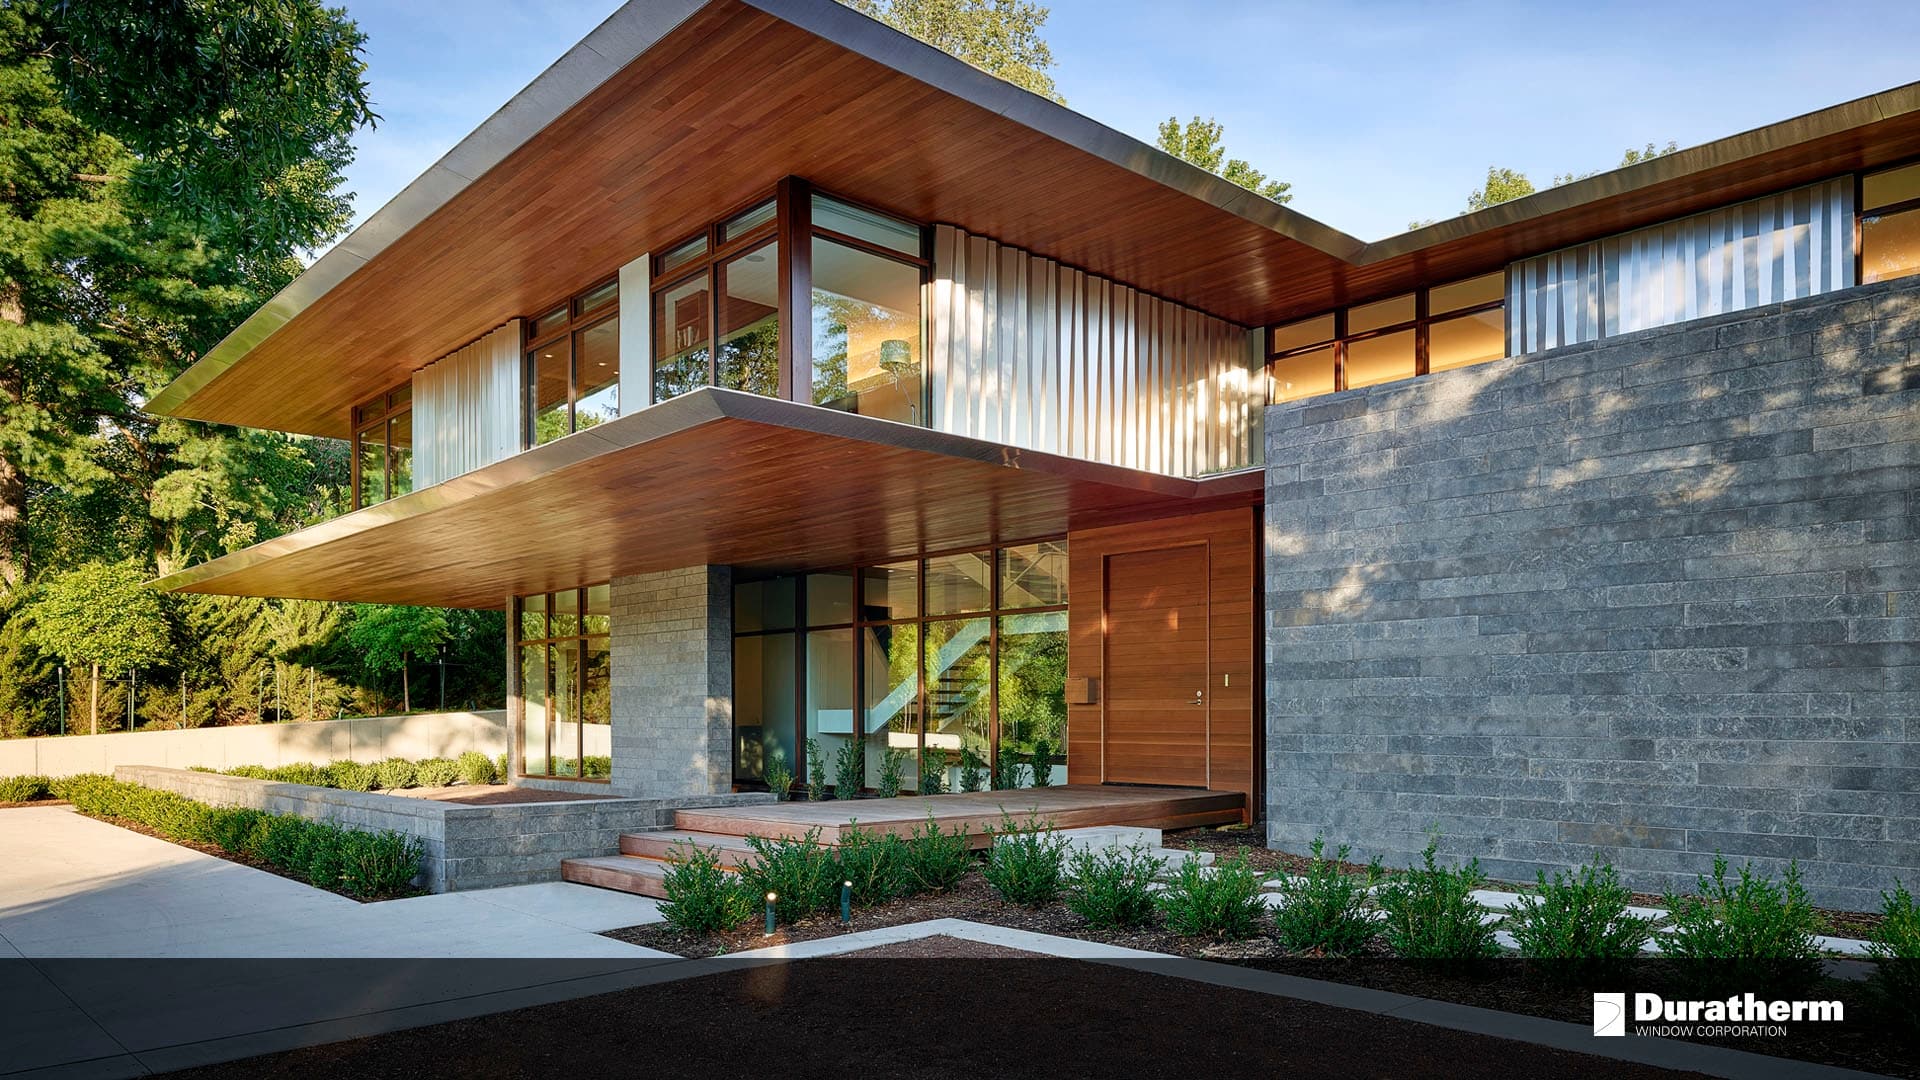 Kansas City, Missouri home exterior is a mixture of wood and stone